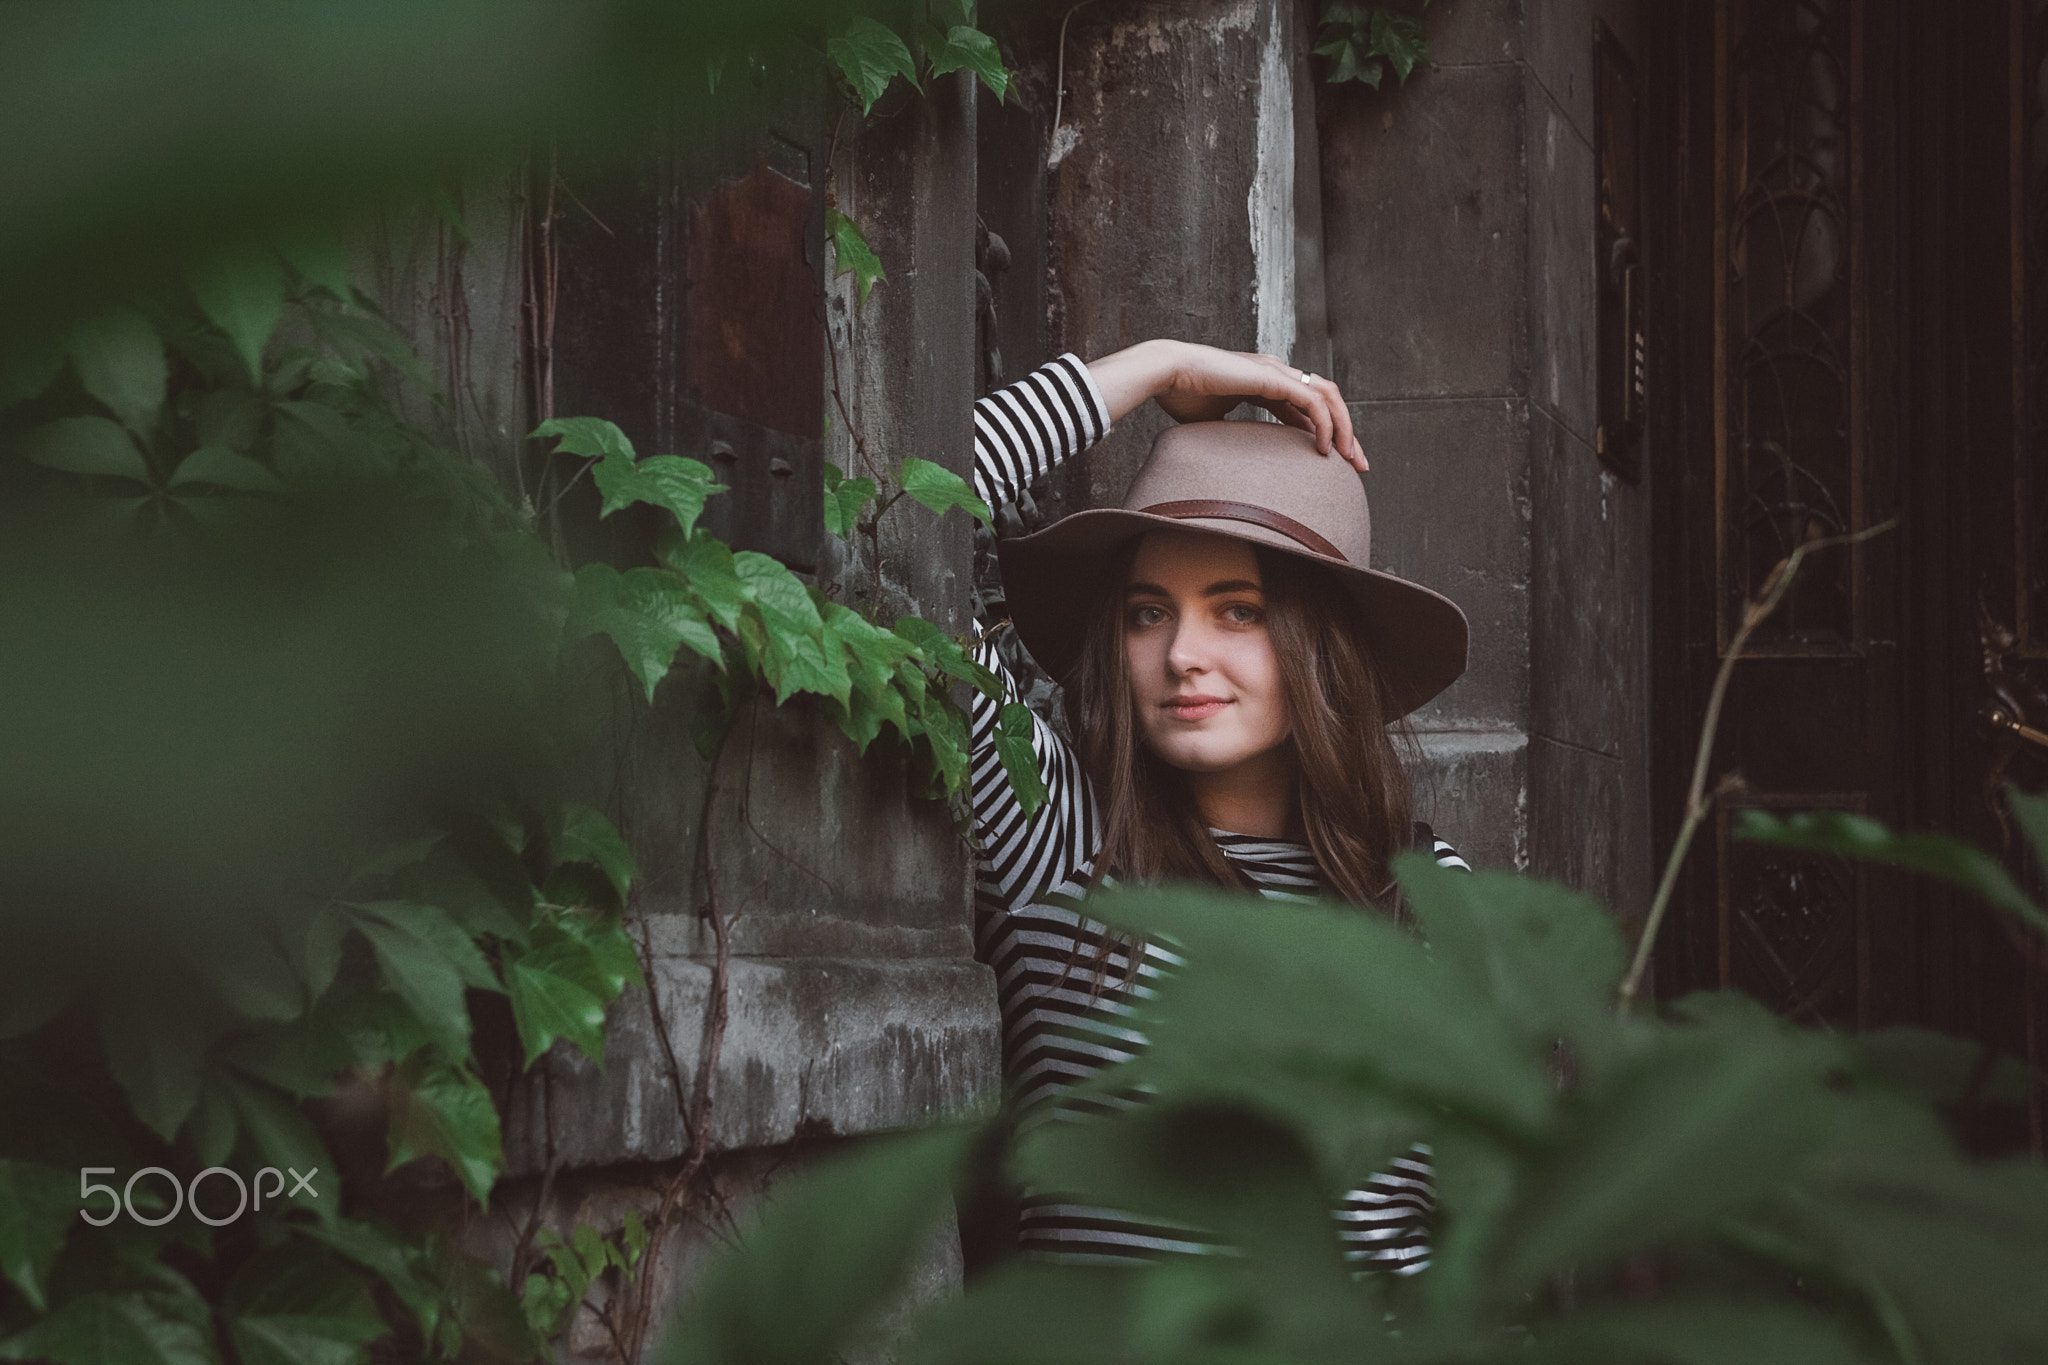 Beautiful woman in a striped shirt holding her hat and looking at a camera.